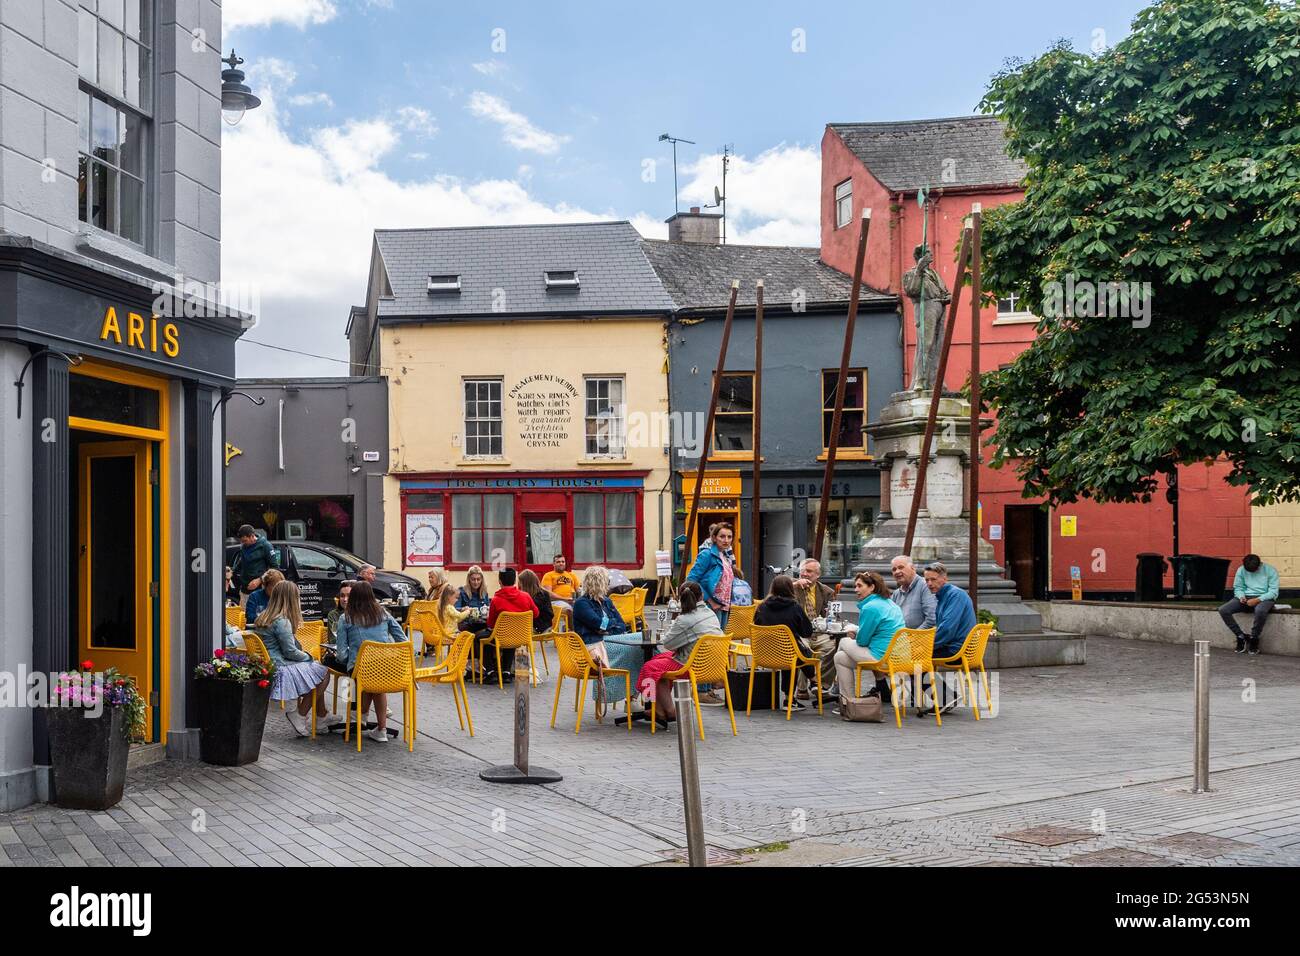 Clonakilty, West Cork, Ireland. 25th June, 2021. People were taking advantage of the good weather in Clonakilty today as they ate outside. The government is further easing COVID-19 restrictions on 5th July, dependant on the spread of the Delta variant of the virus. Credit: AG News/Alamy Live News Stock Photo